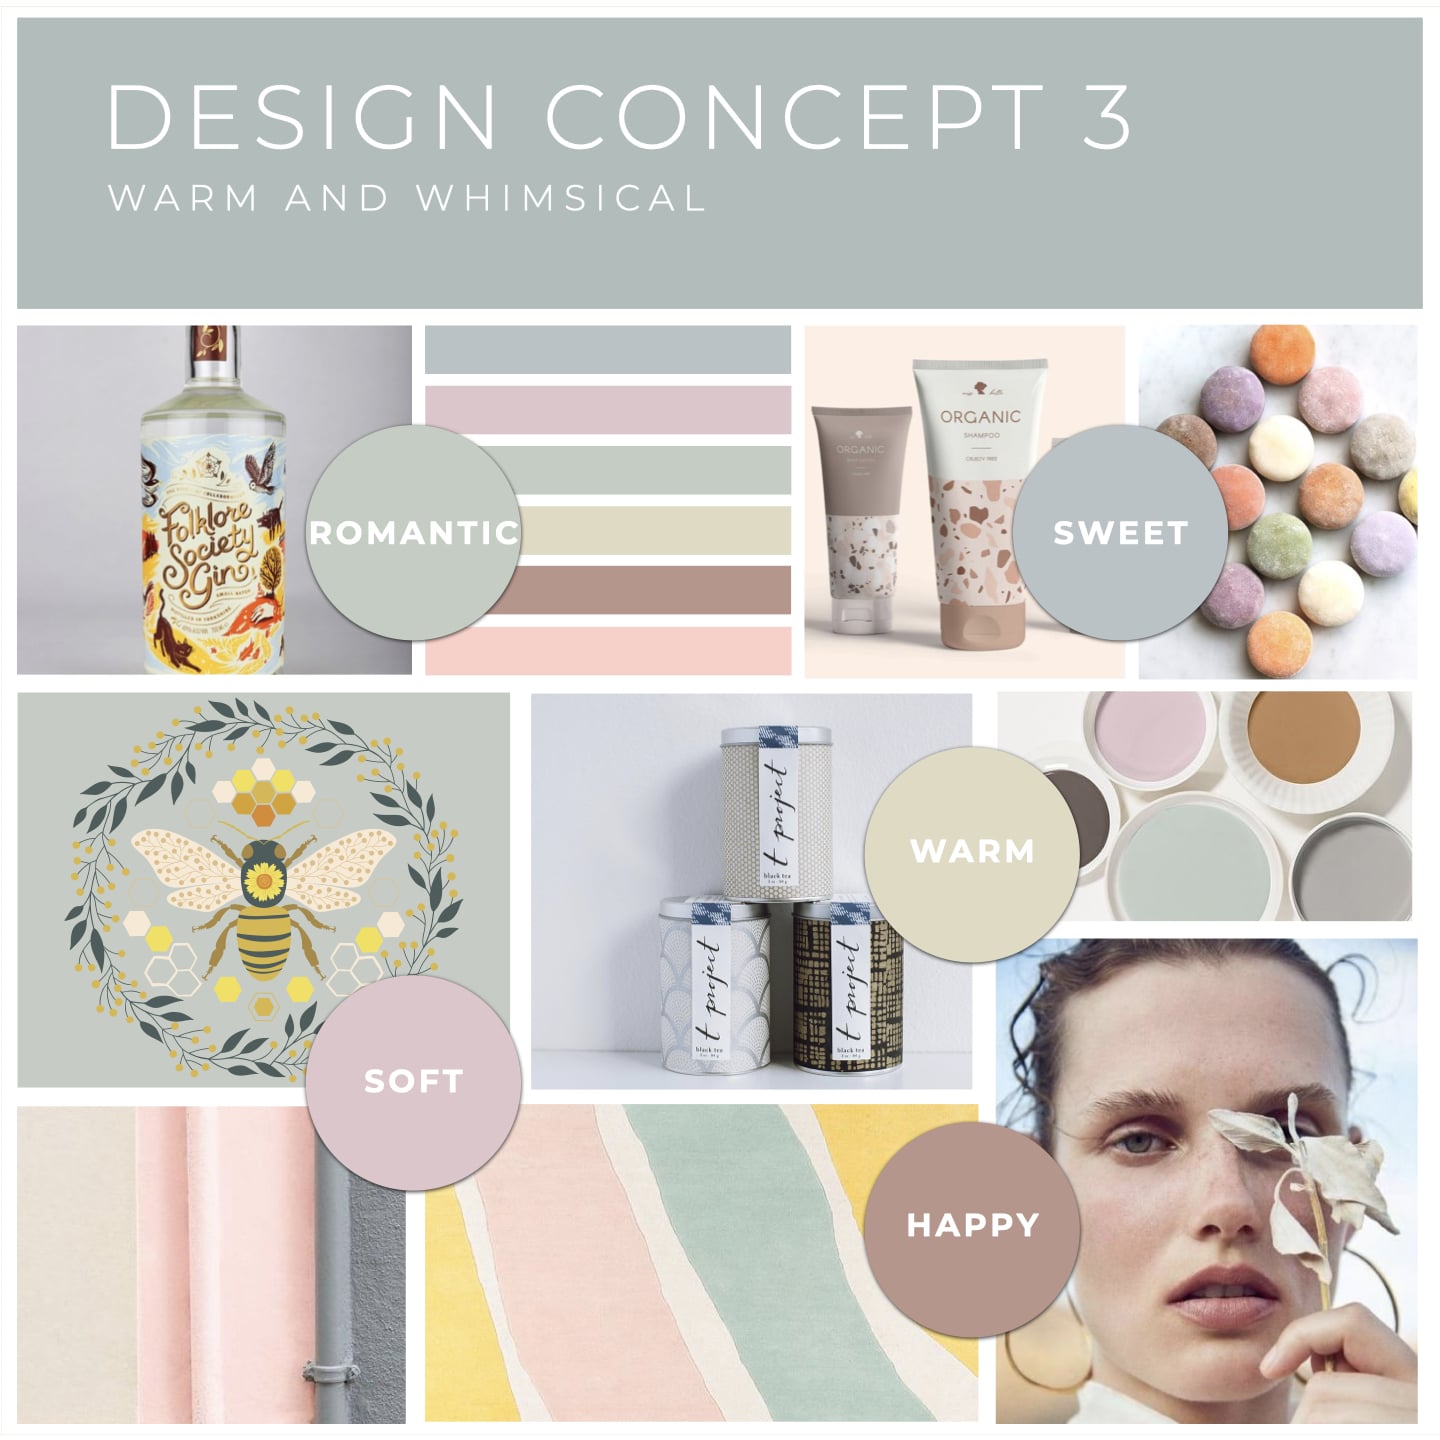 A mood board with pastel colors to be used in a branding project